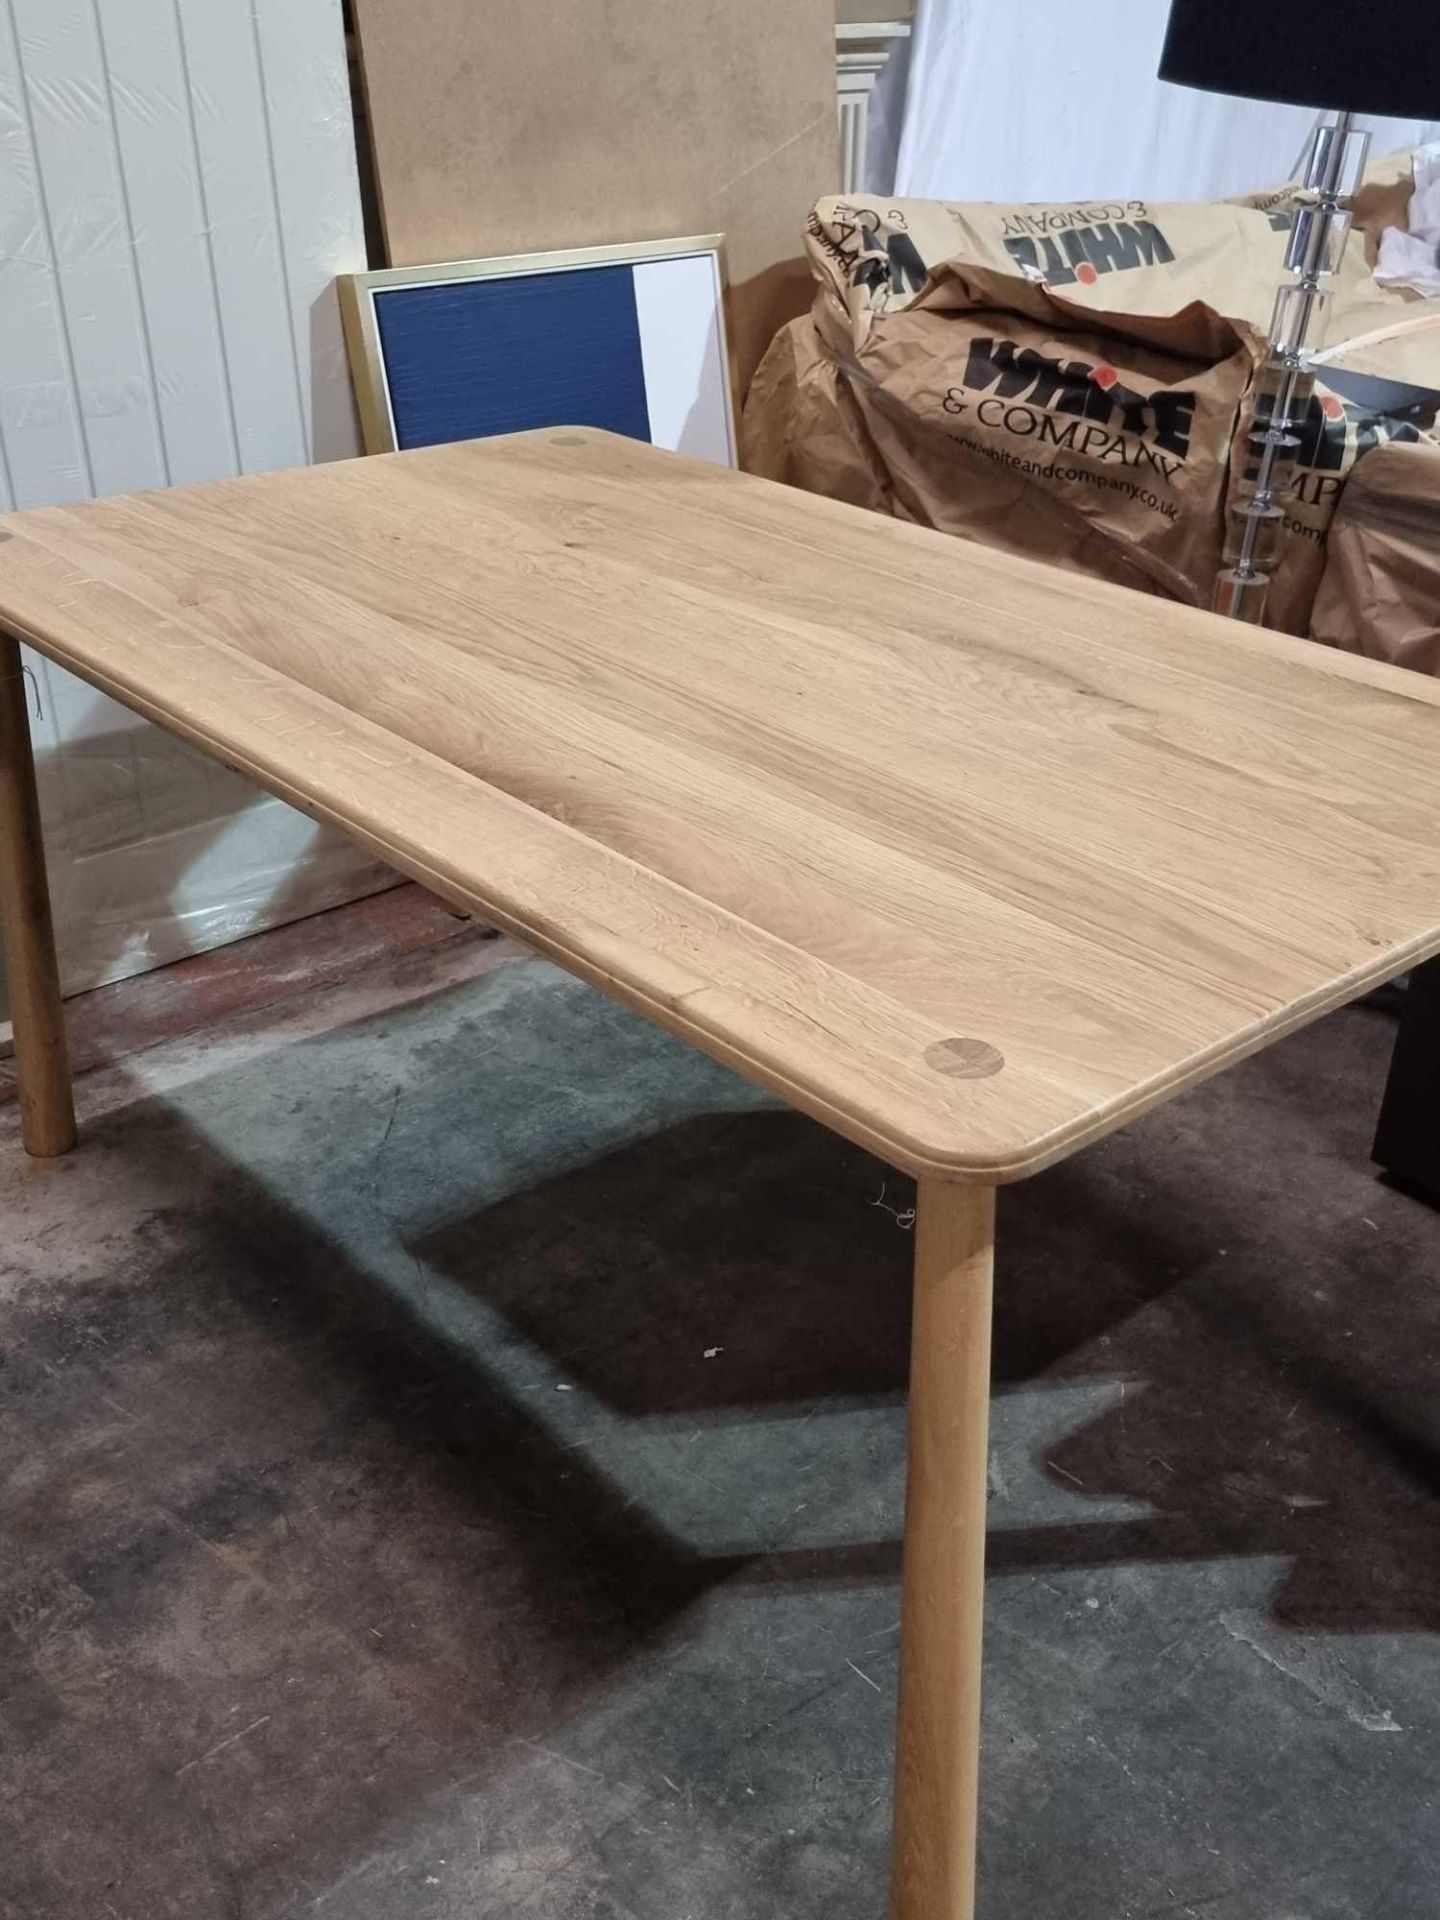 Wycombe Oak Dining Table In Homage To The Arts & Craft Movement Who Made Simple Forms With Little - Image 4 of 5